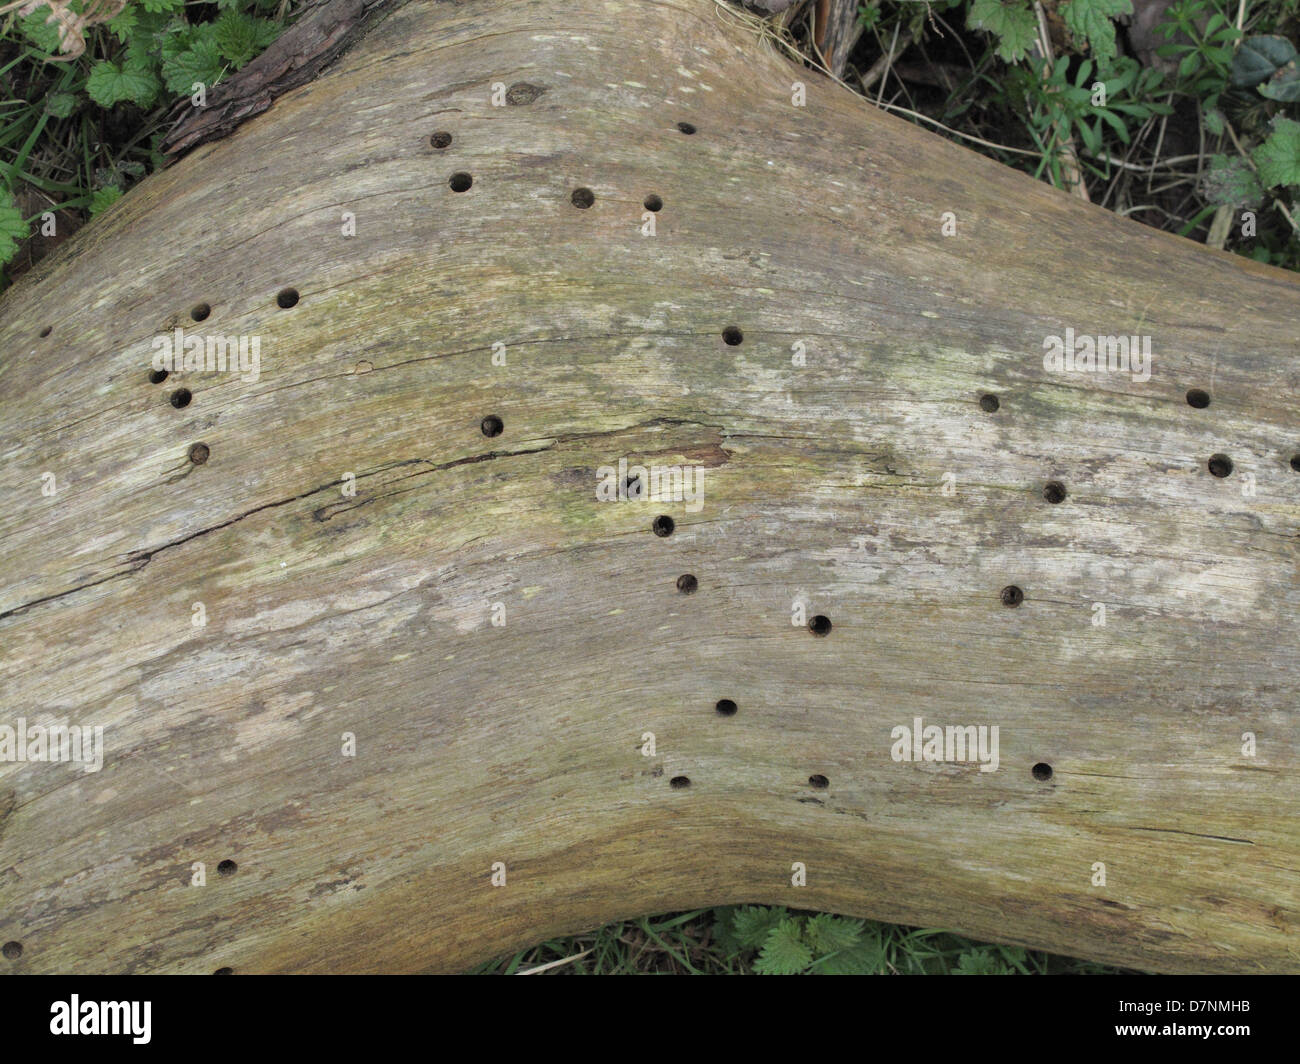 Holes caused by a wood boring beetle larva in the soft wood trunk of a fallen scots pine tree Stock Photo